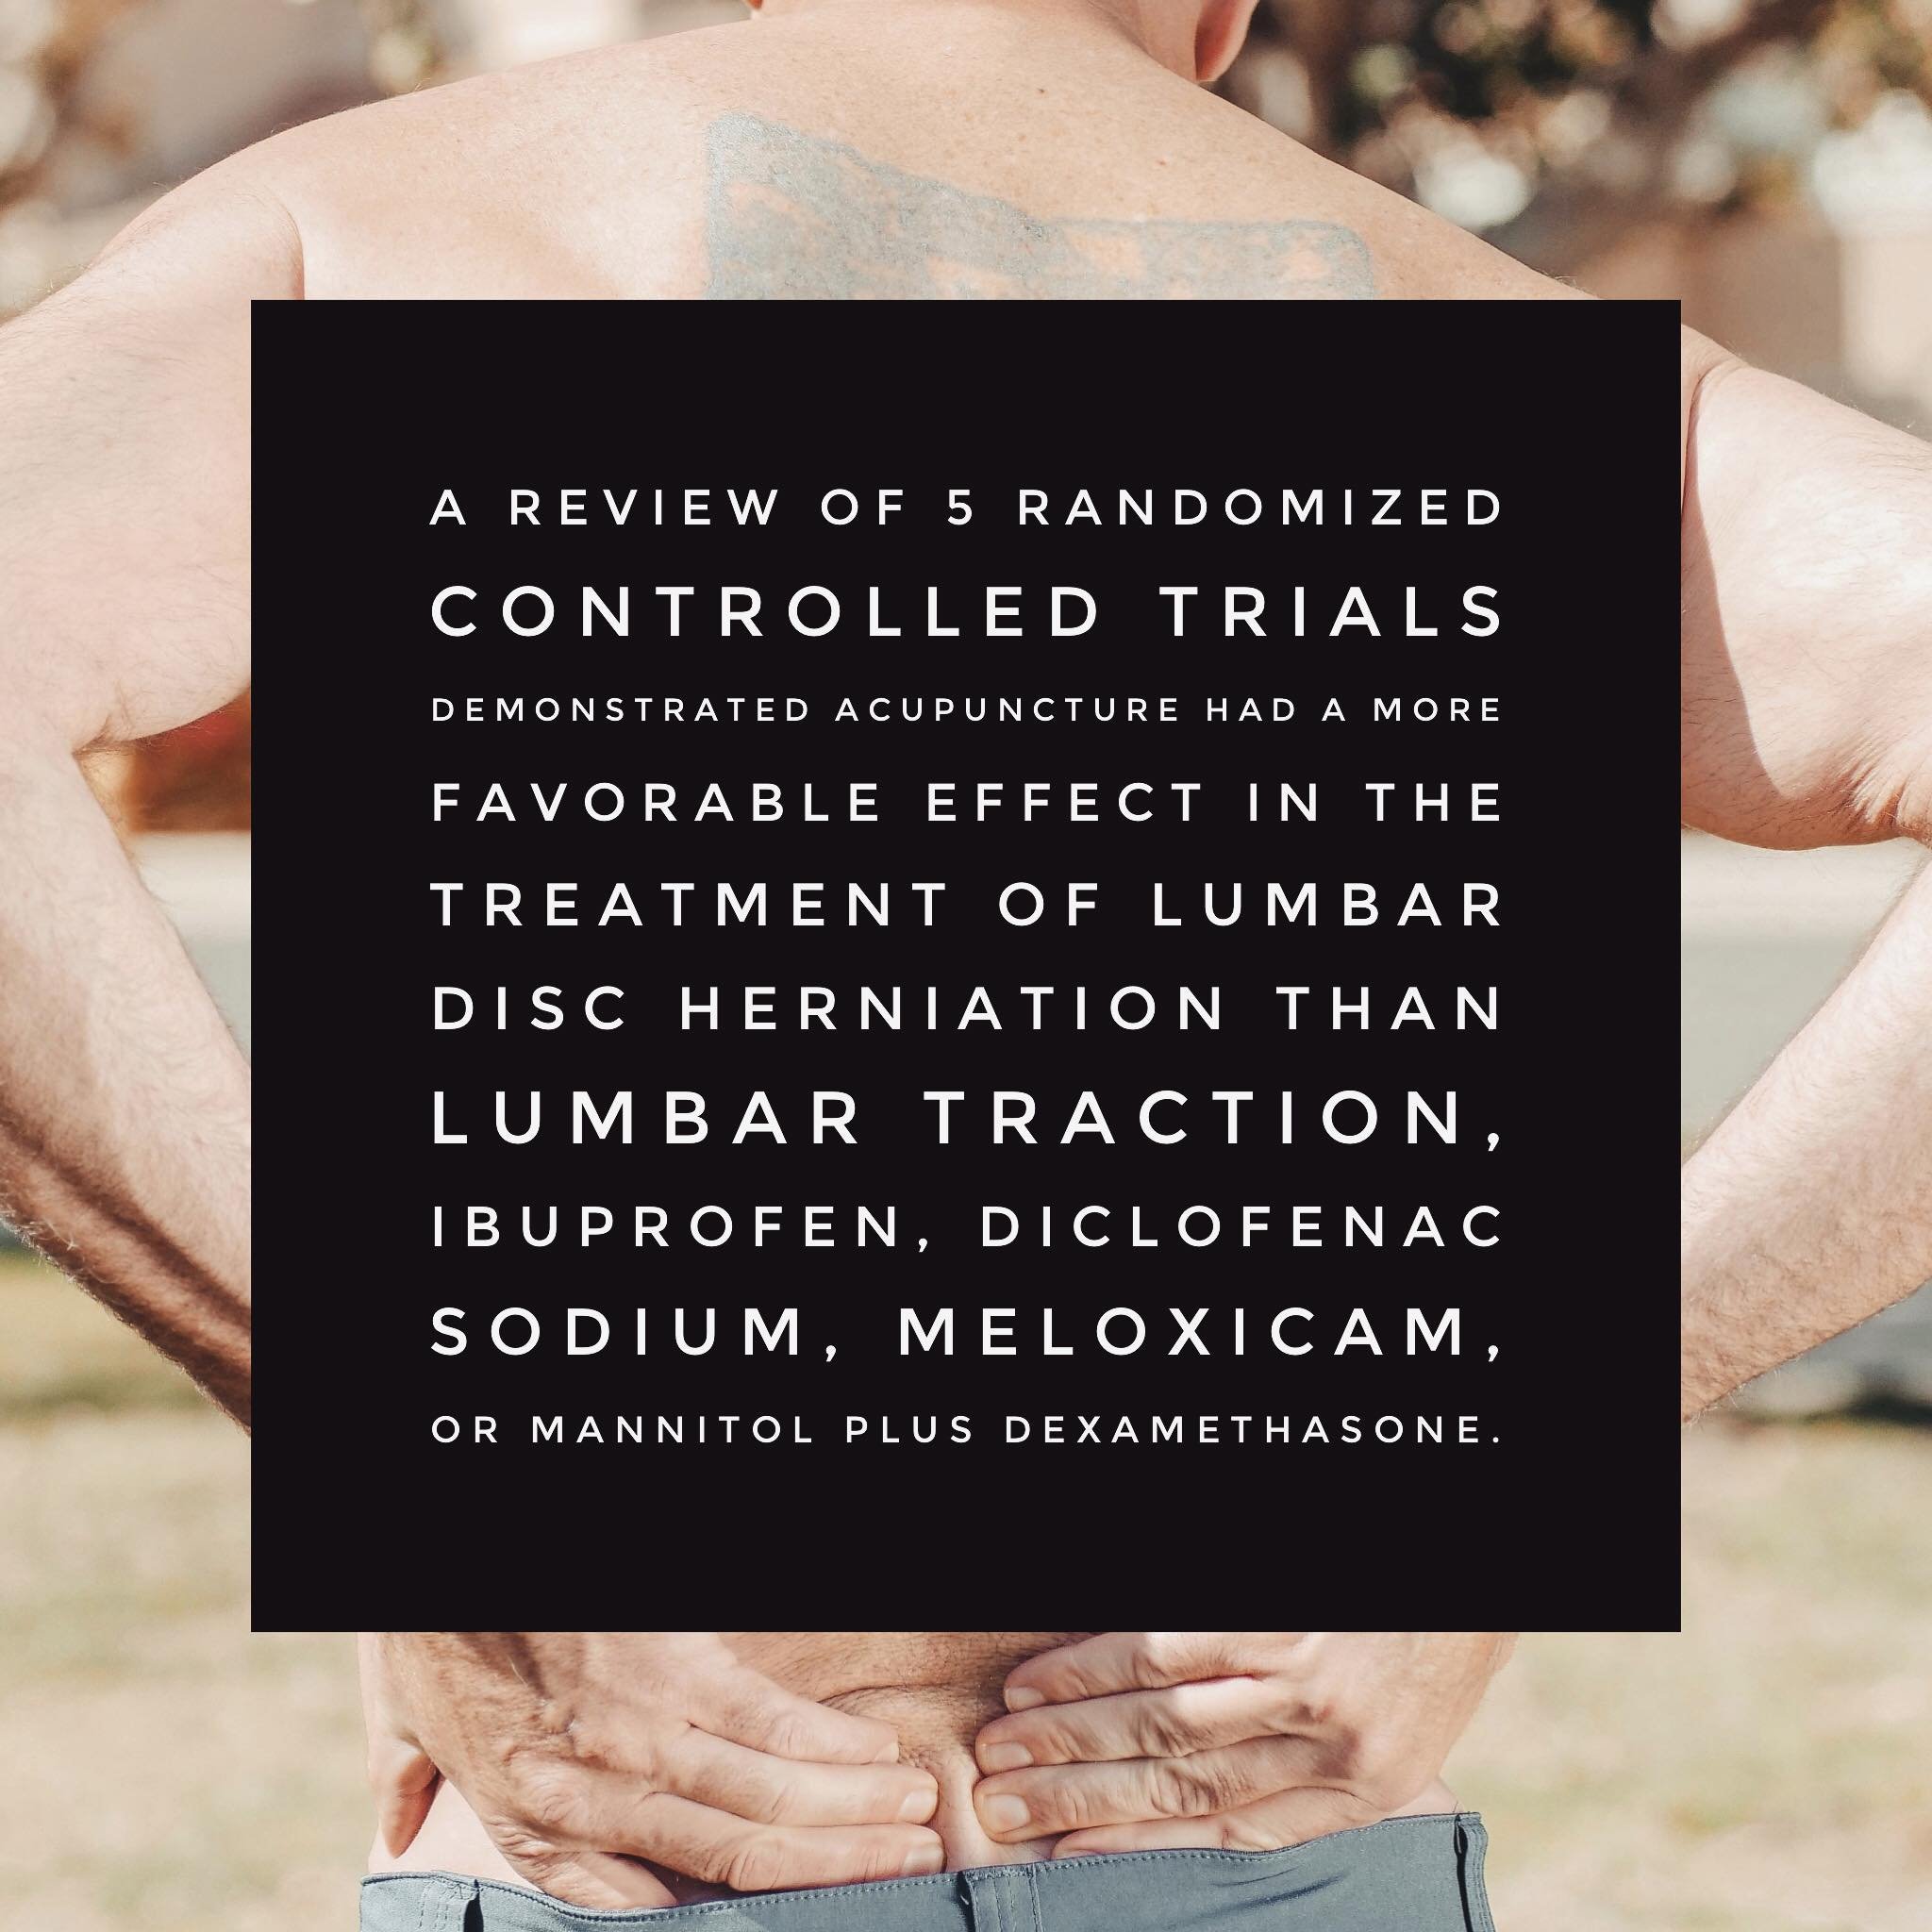 Acupuncture for lumbar disc herniation: a systematic review and meta-analysis. Acupunc Med 2018 Apr;36(2):62-70. doi: 10.1136/acupmed-2016-011332. Epub 2018 Mar 1. #acupuncture #acupunctureforpain #acupuncturefordischerniation #acupunctureforbackpain